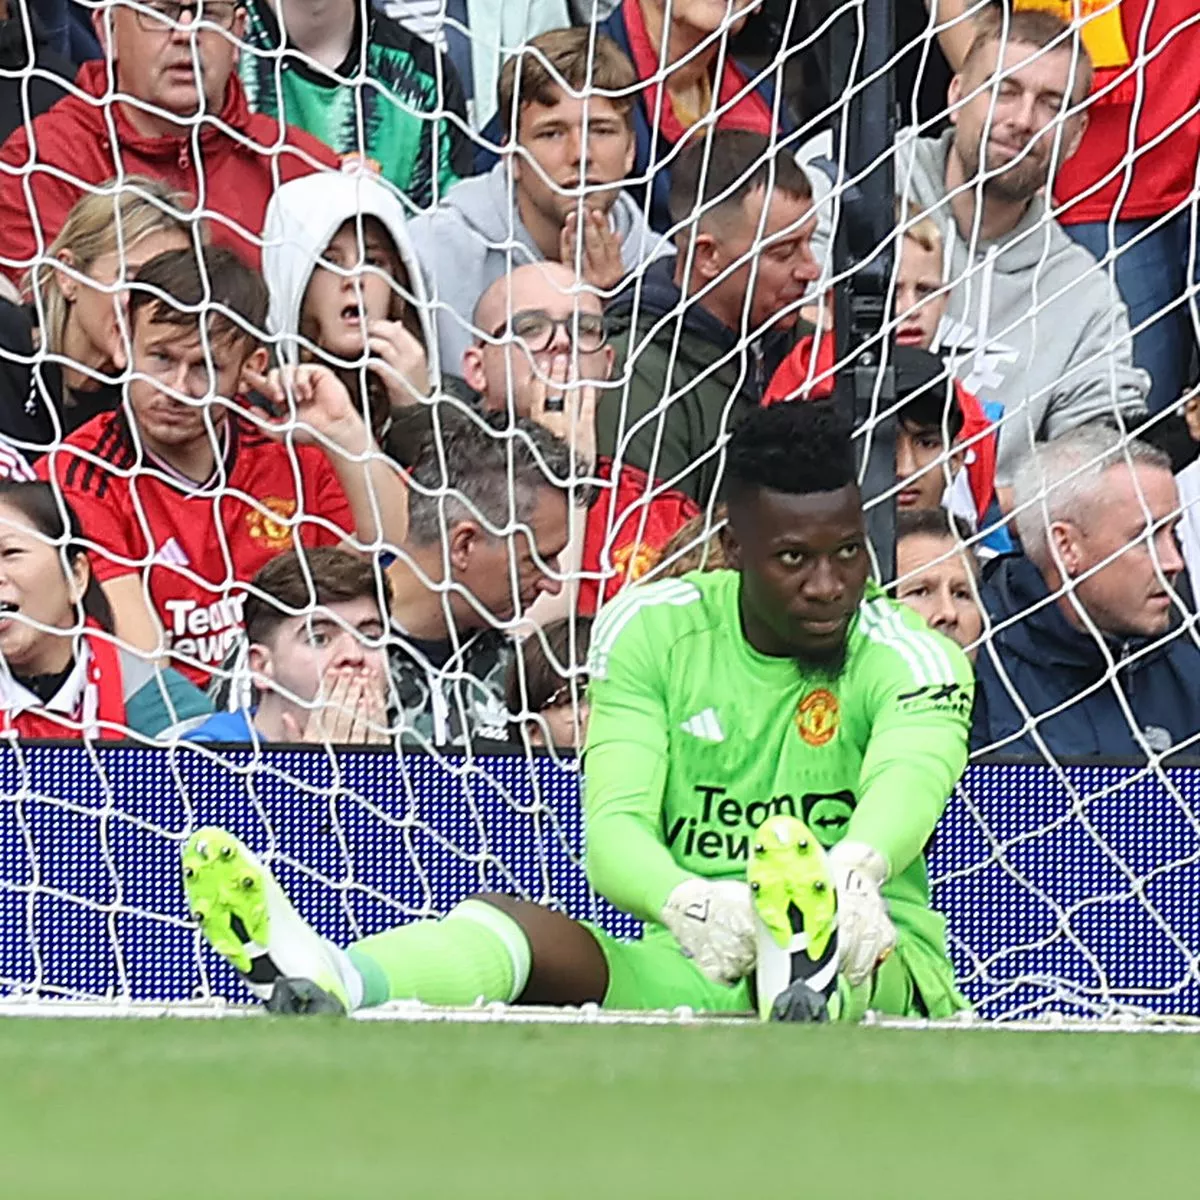 Andre Onana takes blame for Man Utd defeat after mistake but earns Rio Ferdinand’s ‘respect’